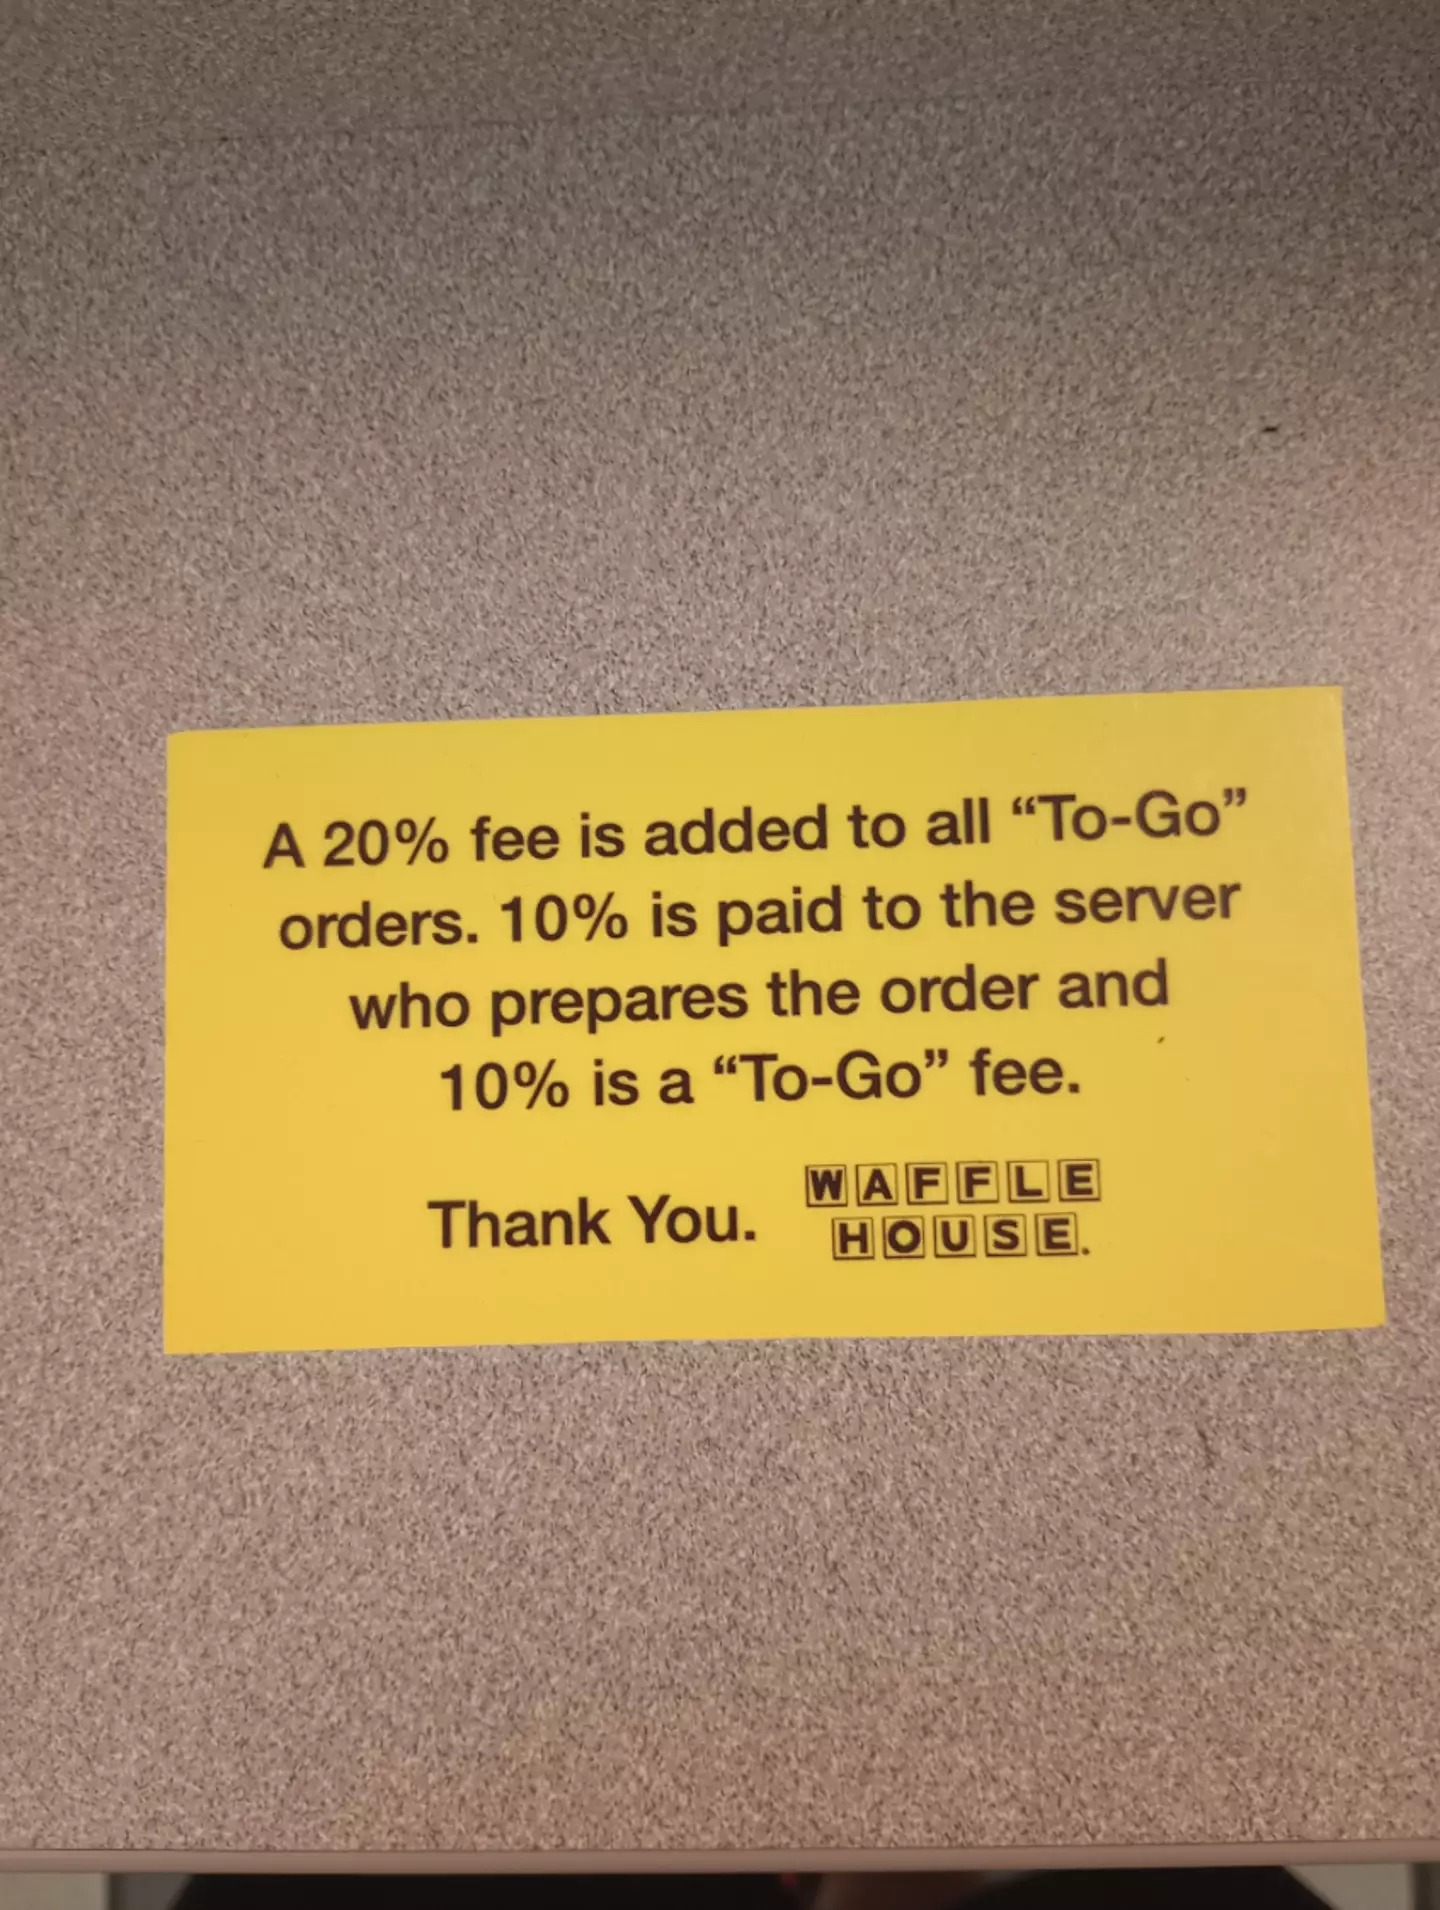 'To-Go' fees have confused a lot of people.